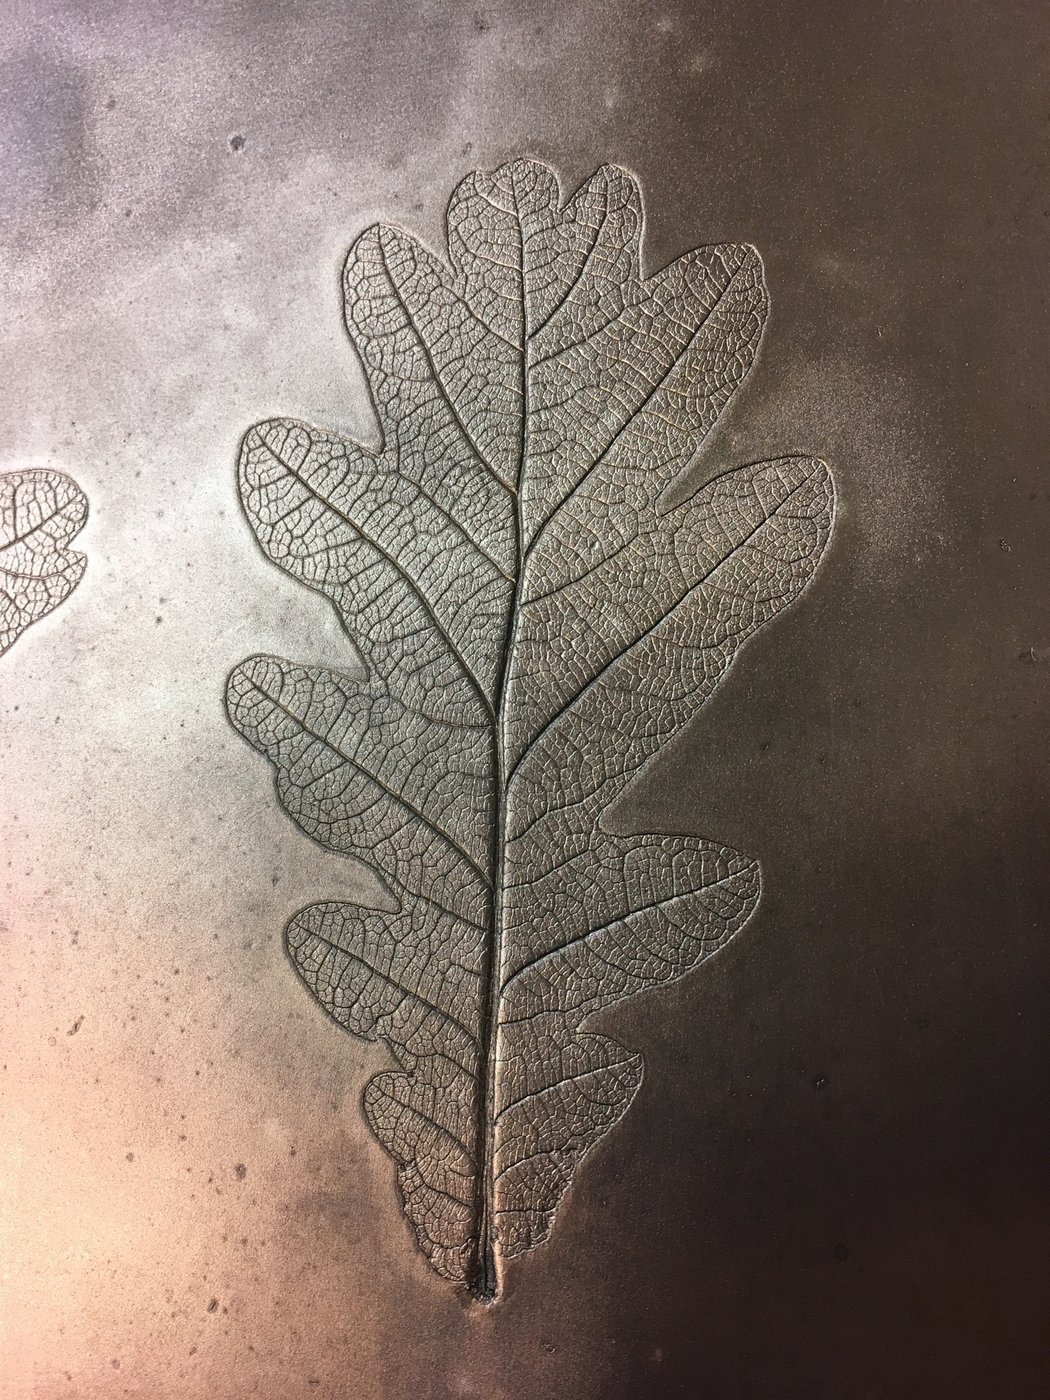 traces of fine details of a leave on a copper colored surface